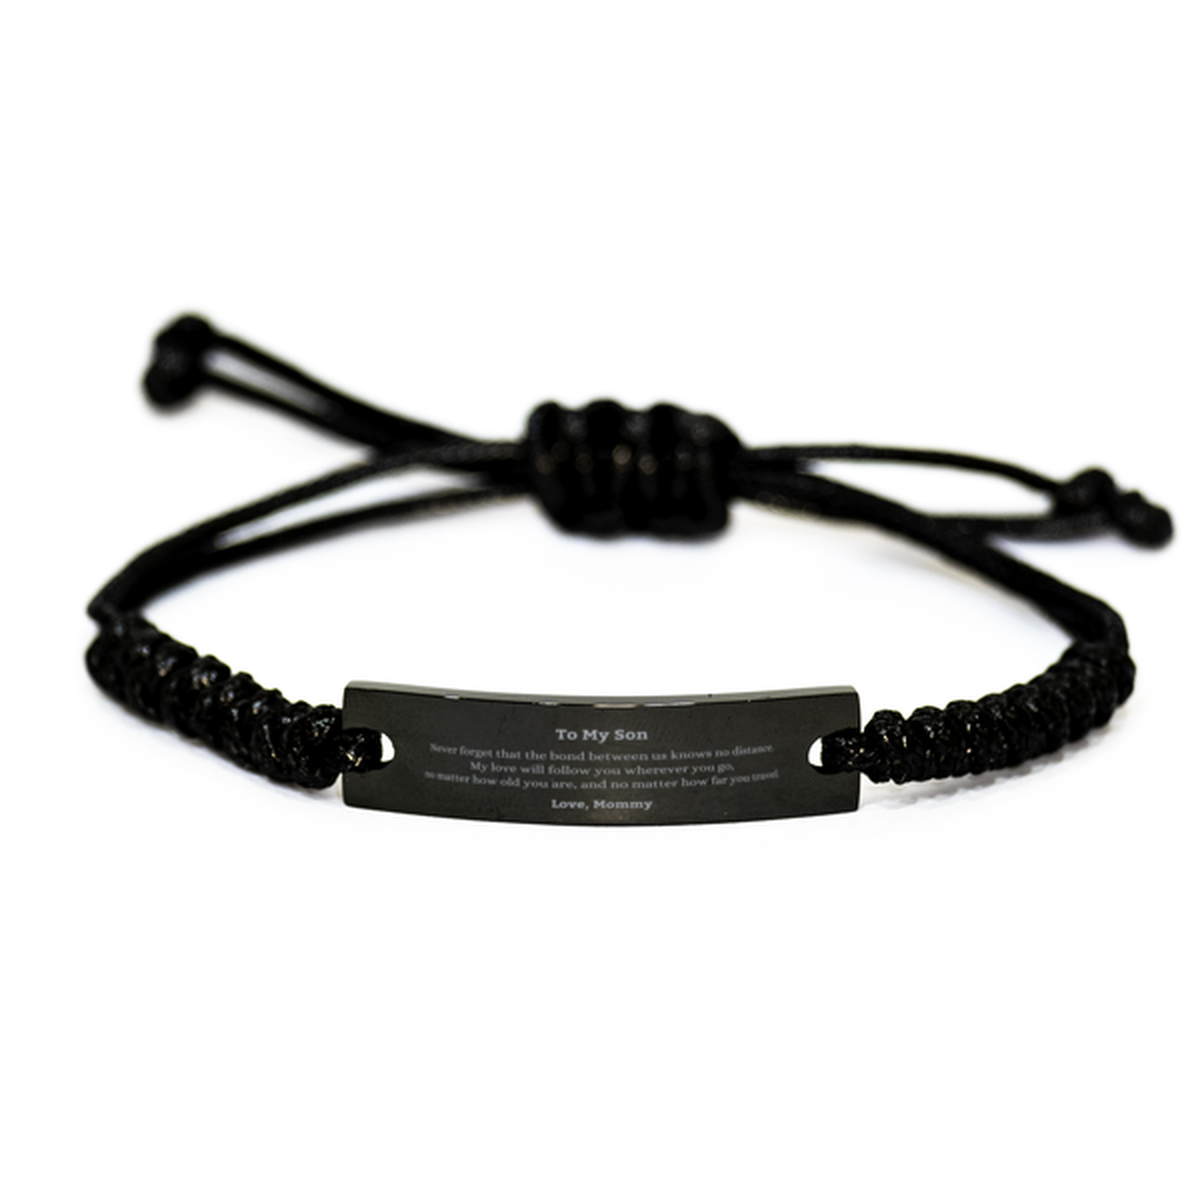 Son Birthday Gifts from Mommy, Adjustable Black Rope Bracelet for Son Christmas Graduation Unique Gifts Son Never forget that the bond between us knows no distance. Love, Mommy